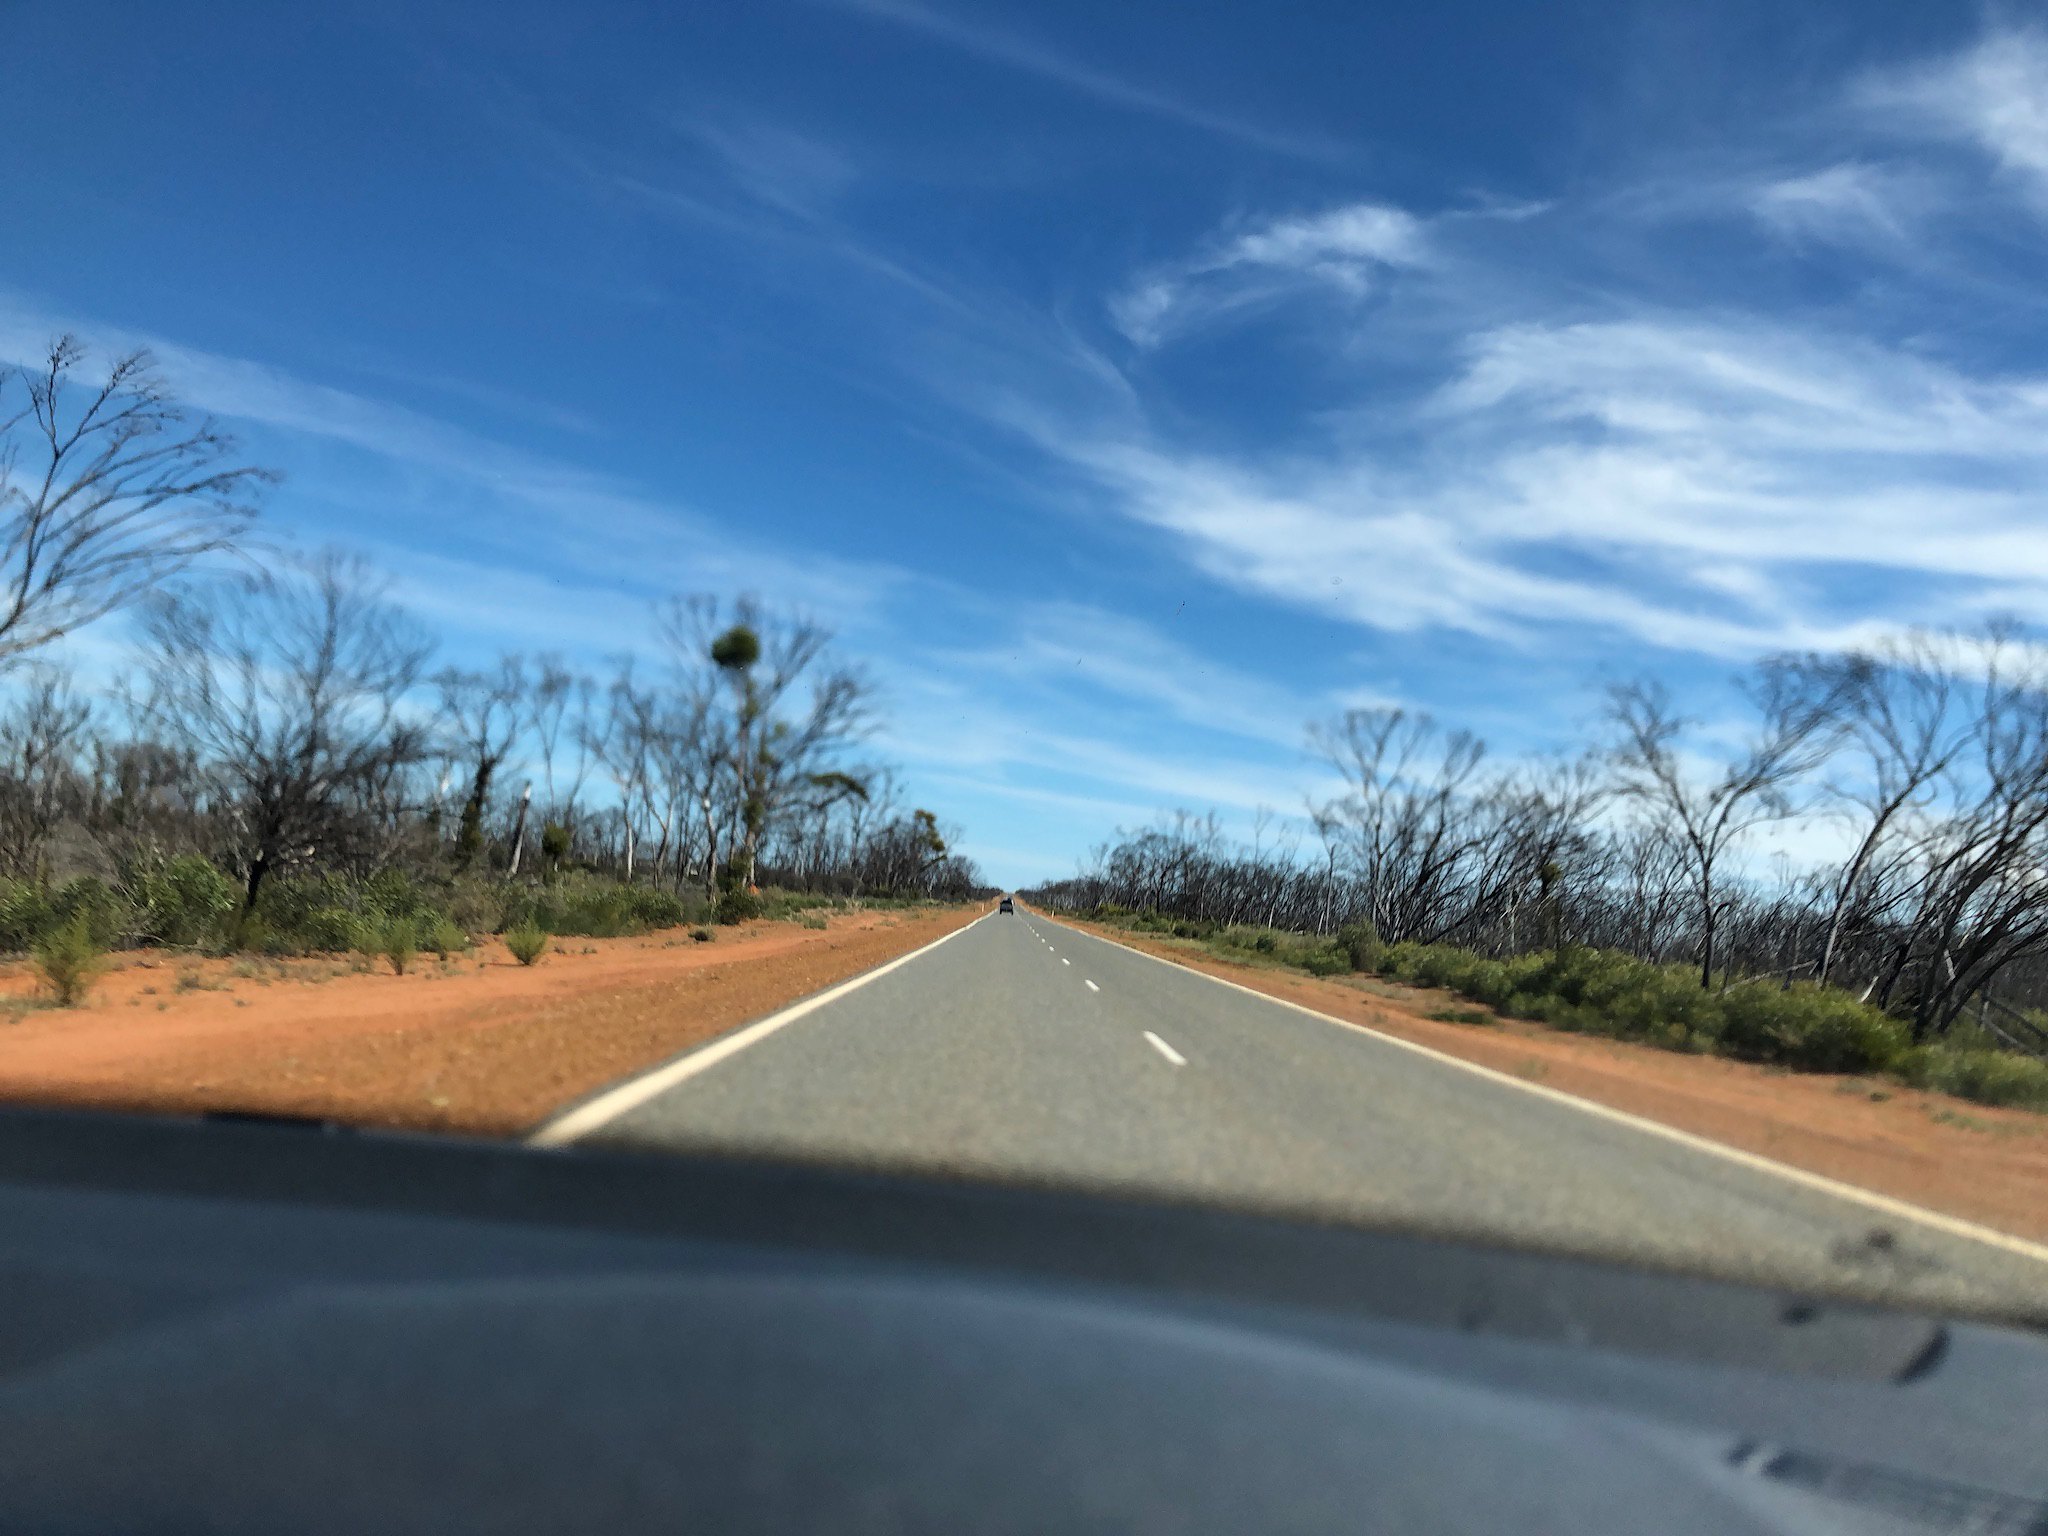 On the Road with accidental Motion Blur